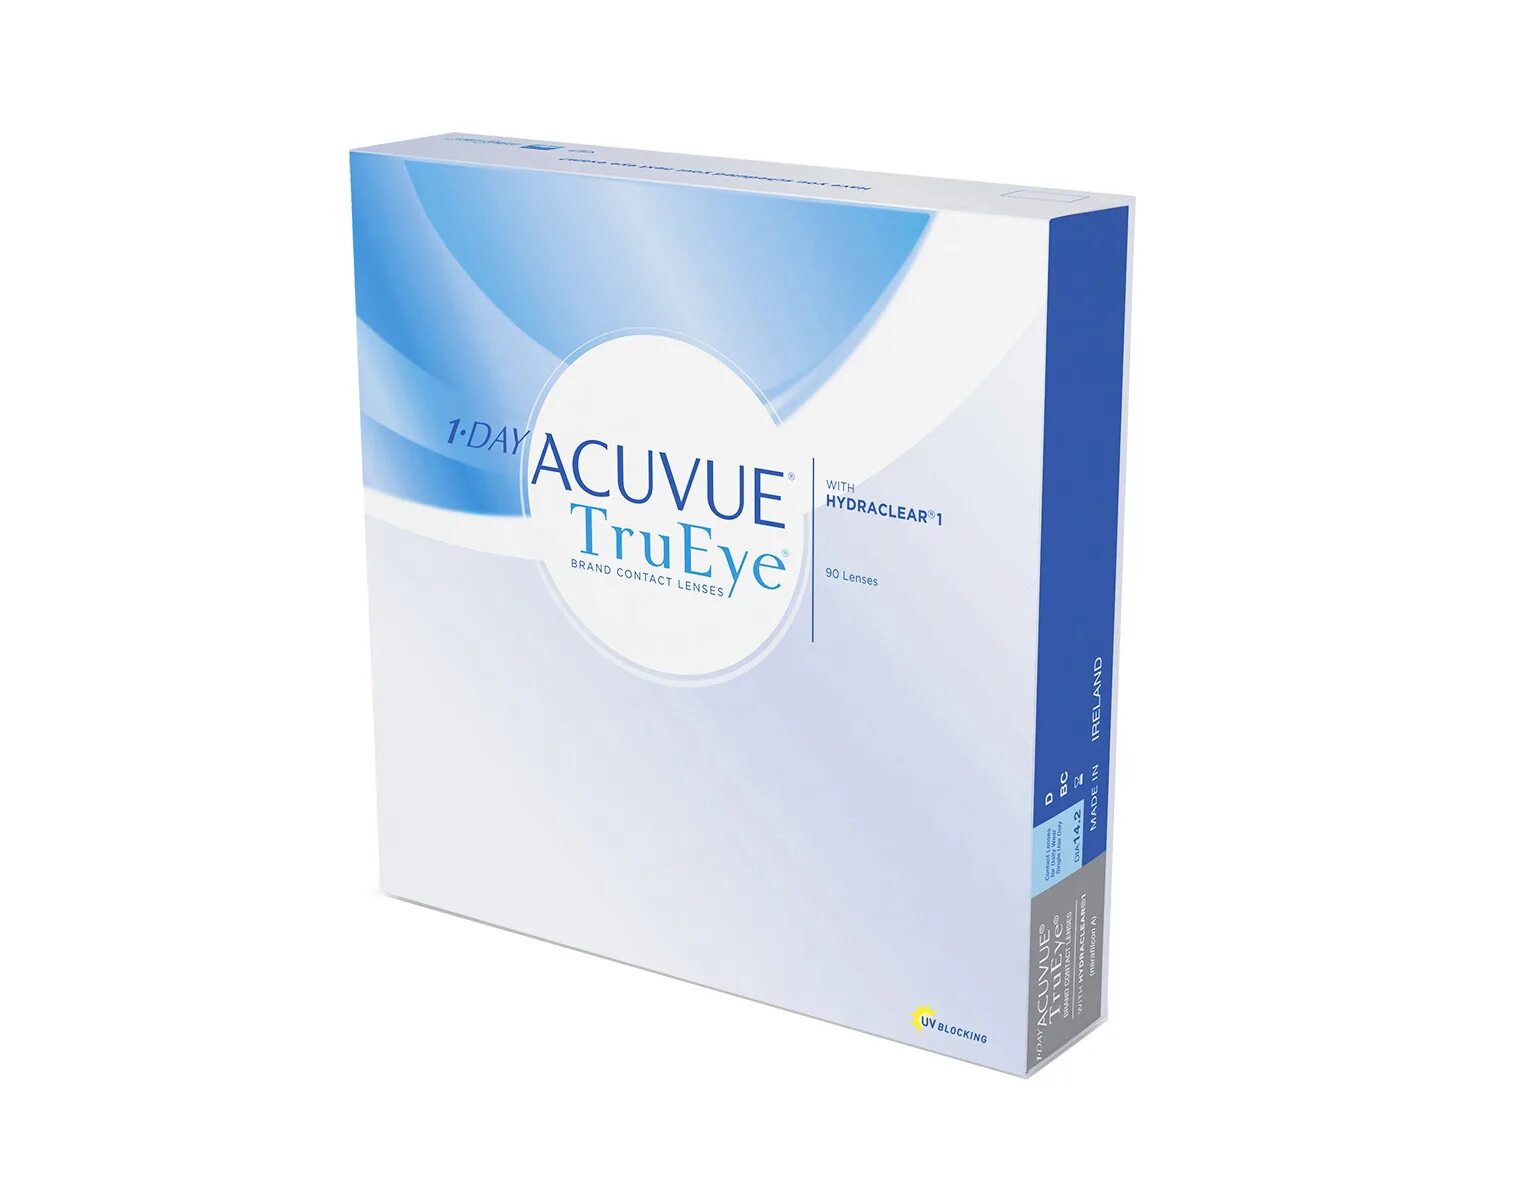 Acuvue true. Acuvue TRUEYE with Hydraclear 1. 1-Day Acuvue TRUEYE 90. Acuvue 1-Day TRUEYE. Контактные линзы Acuvue 1 Day TRUEYE with Hydraclear.